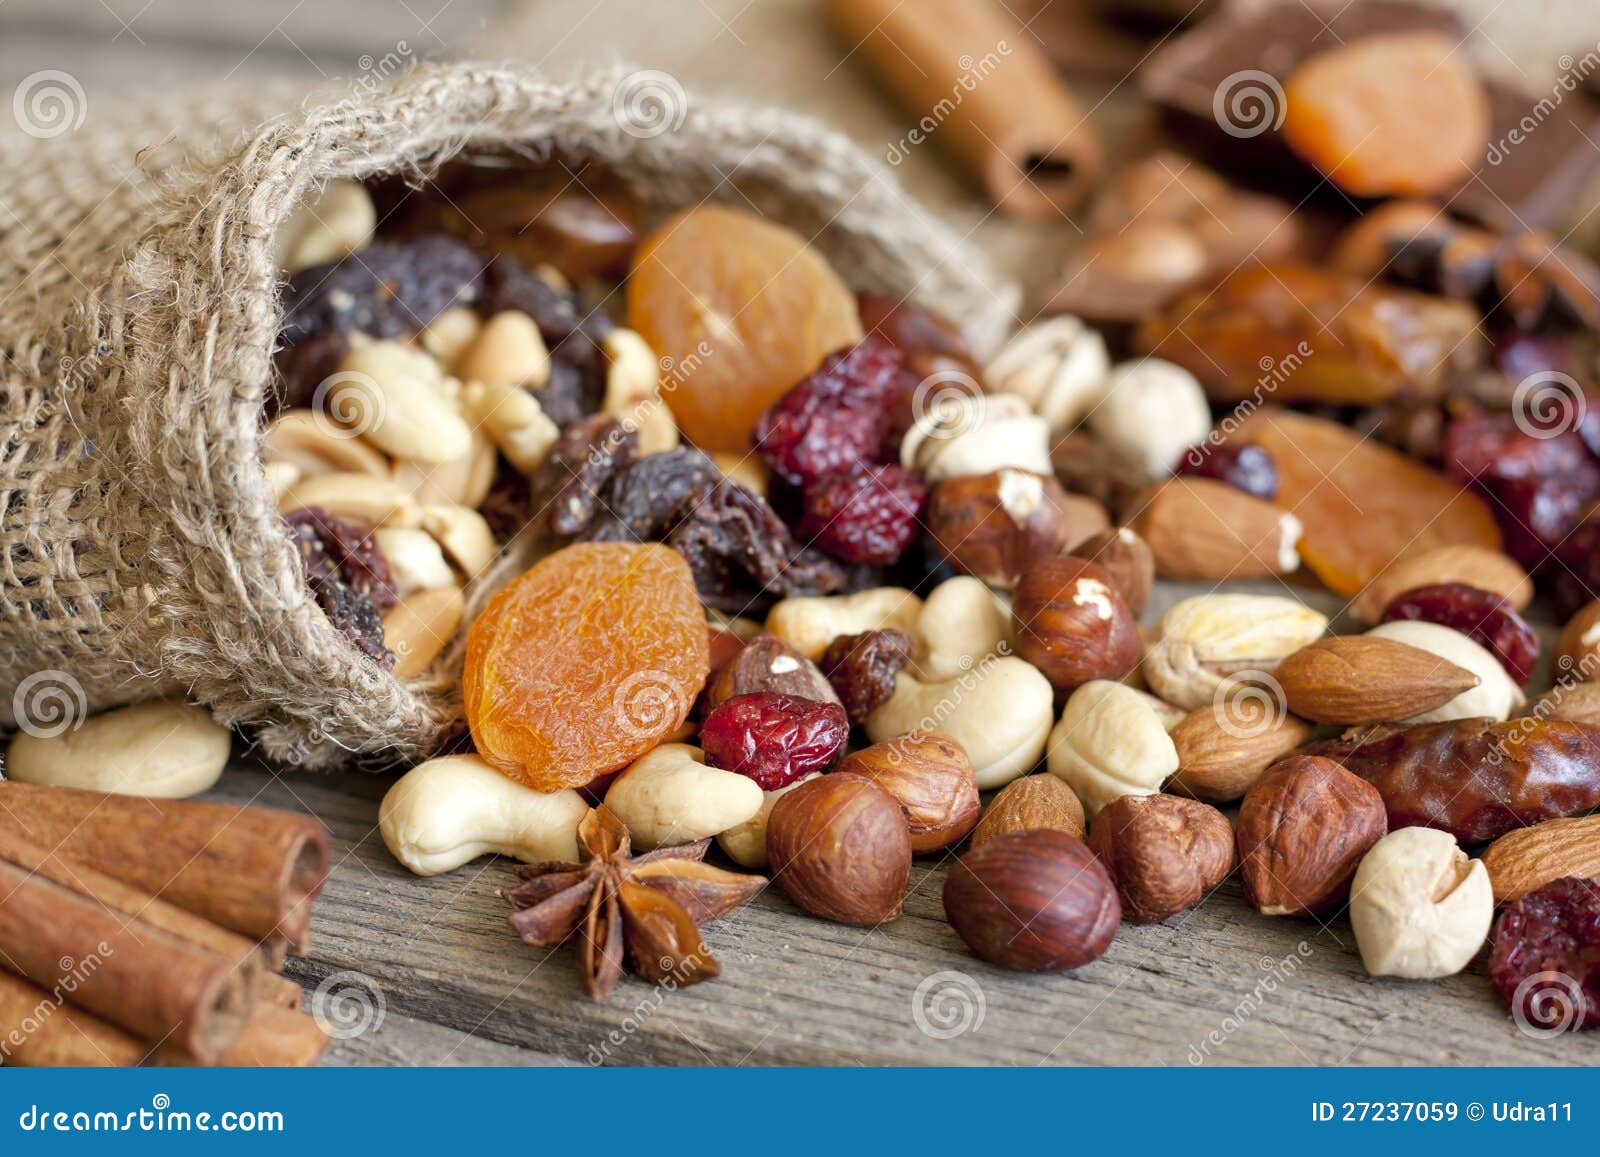 nuts and dried fruits mix